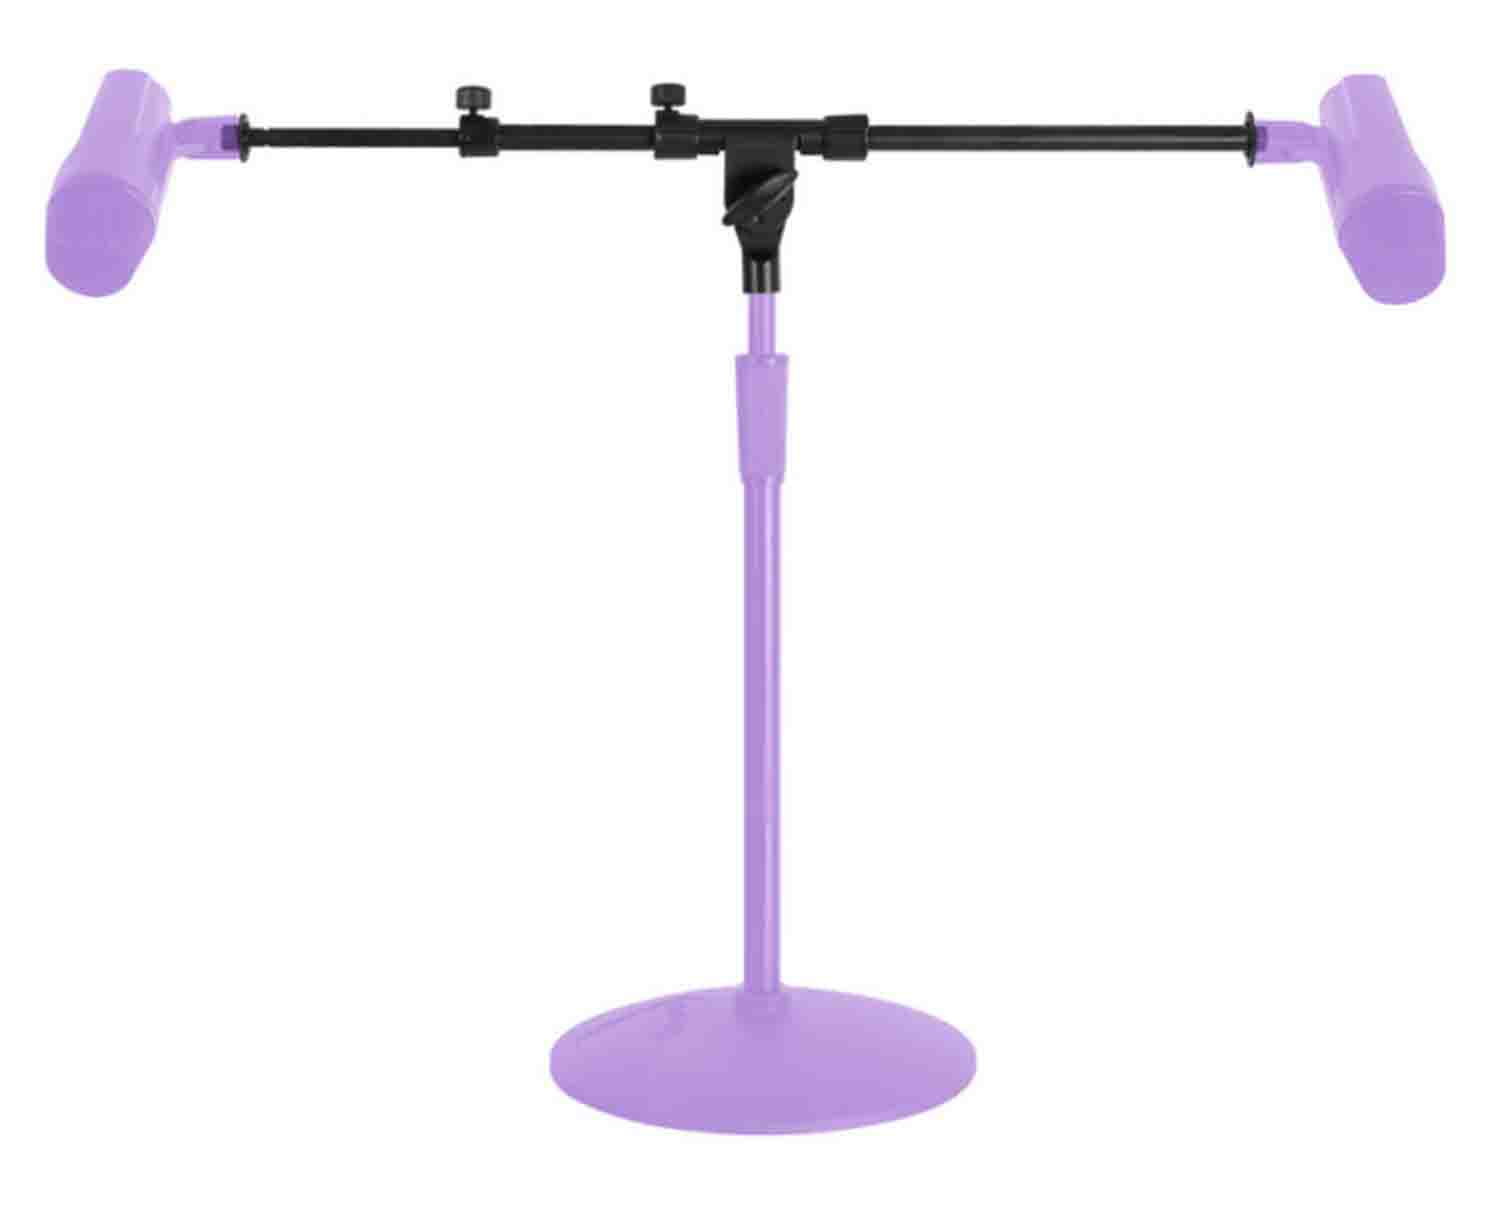 Onstage MSA9800 Telescoping Boom Arm with Dual Microphone Capability - Hollywood DJ